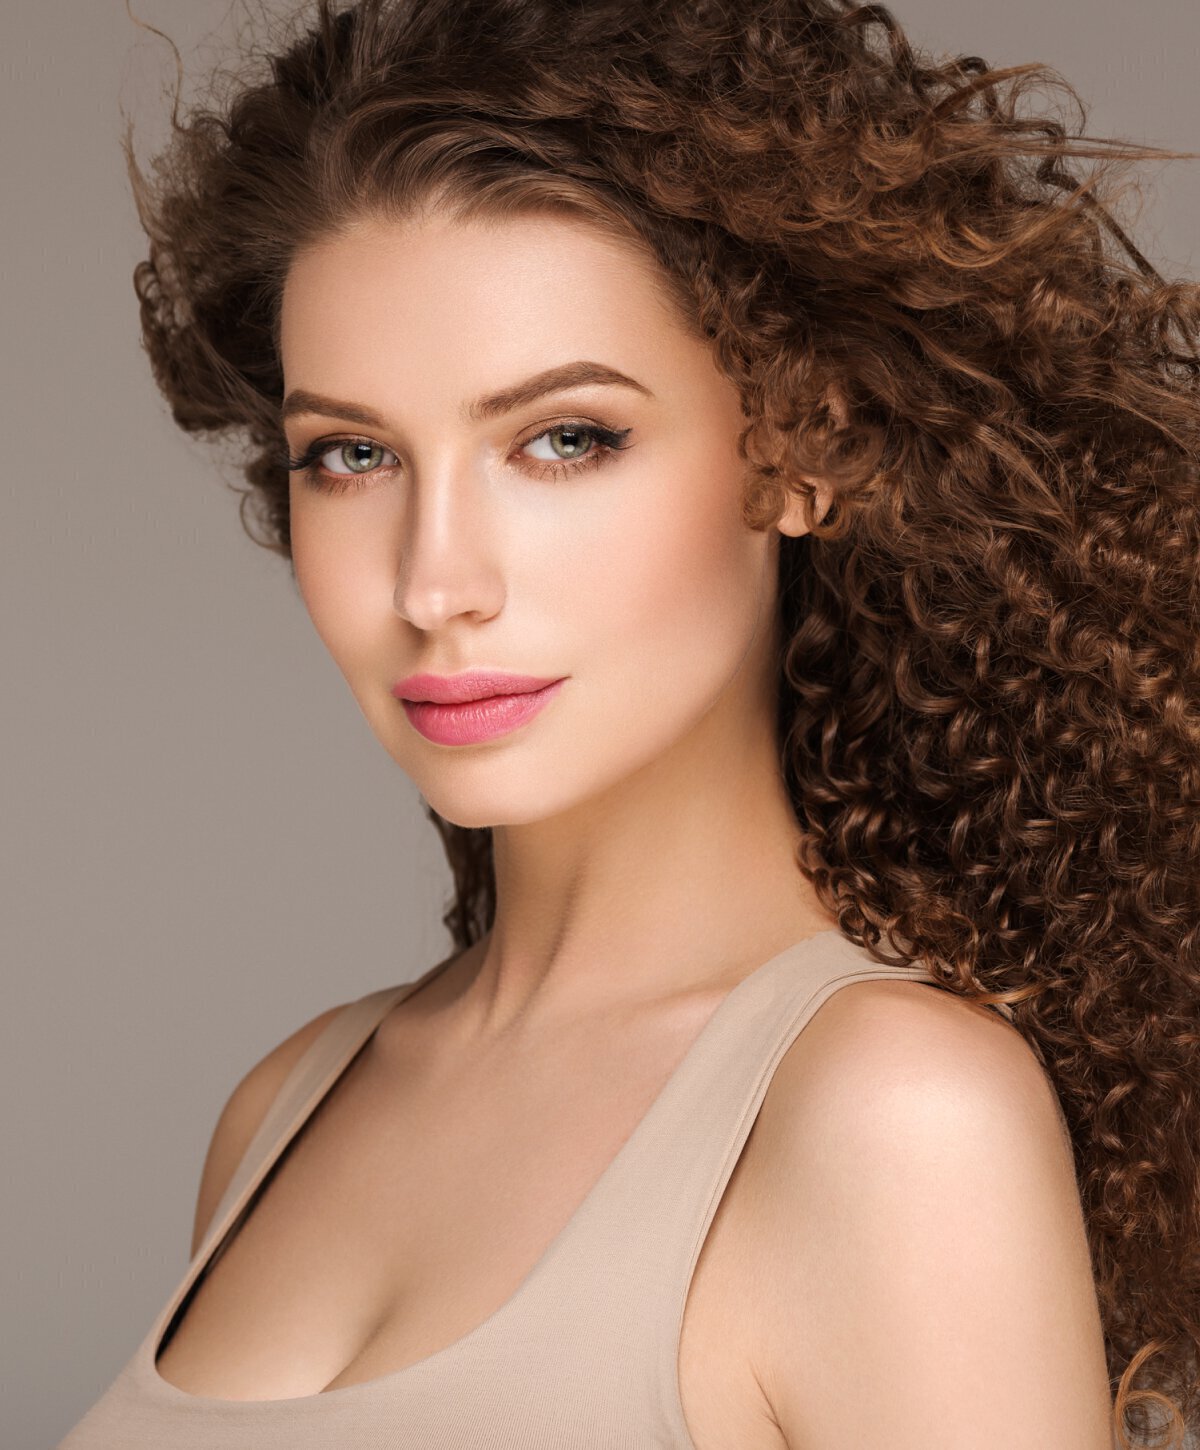 Palo Alto Radiesse model with curly hair